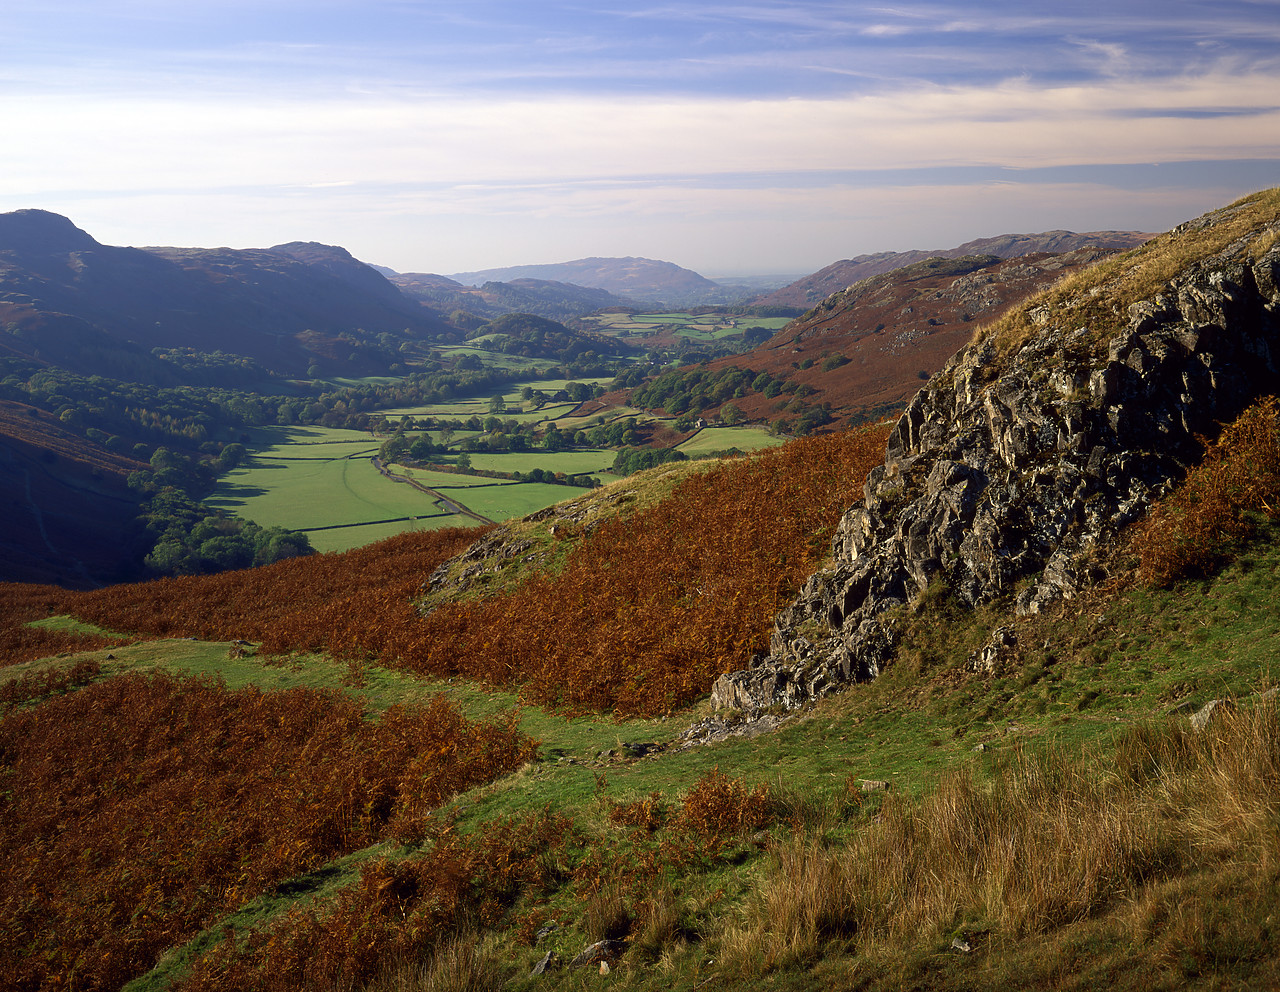 #970471-1 - View over Eskdale, Lake District National Park, Cumbria, England